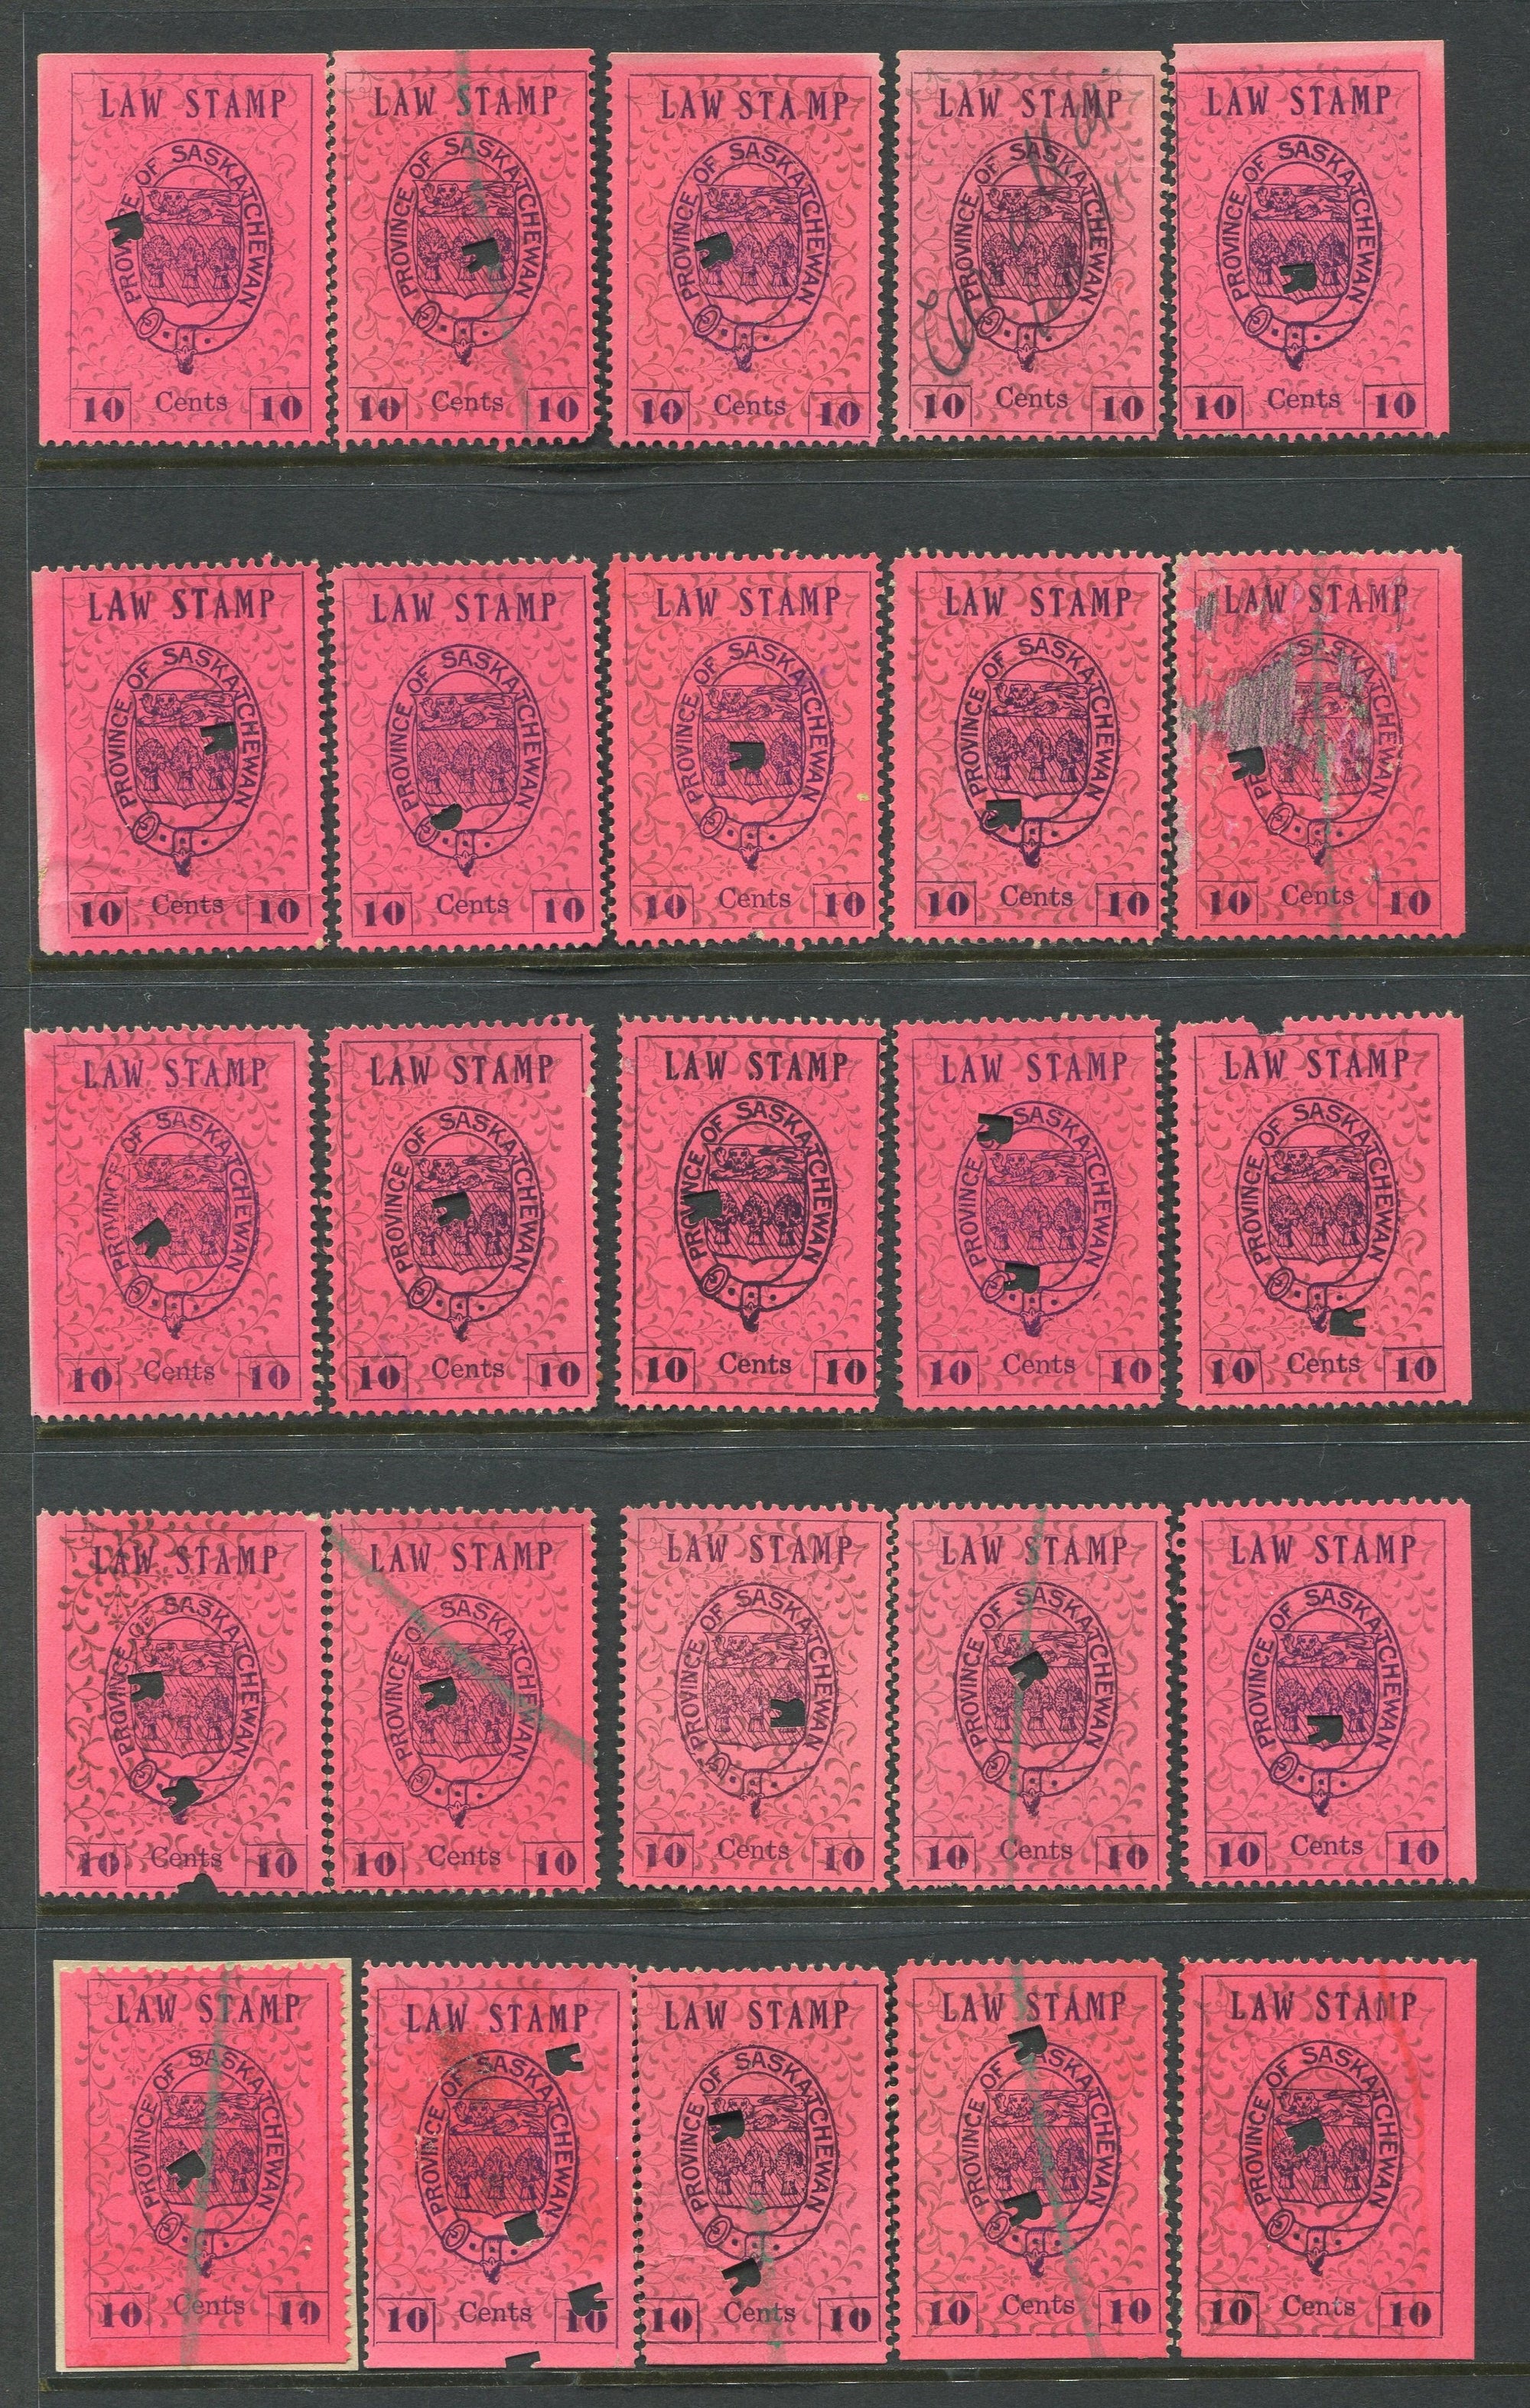 0002SL1709 - SL2 - Used Reconstructed Sheet - Deveney Stamps Ltd. Canadian Stamps